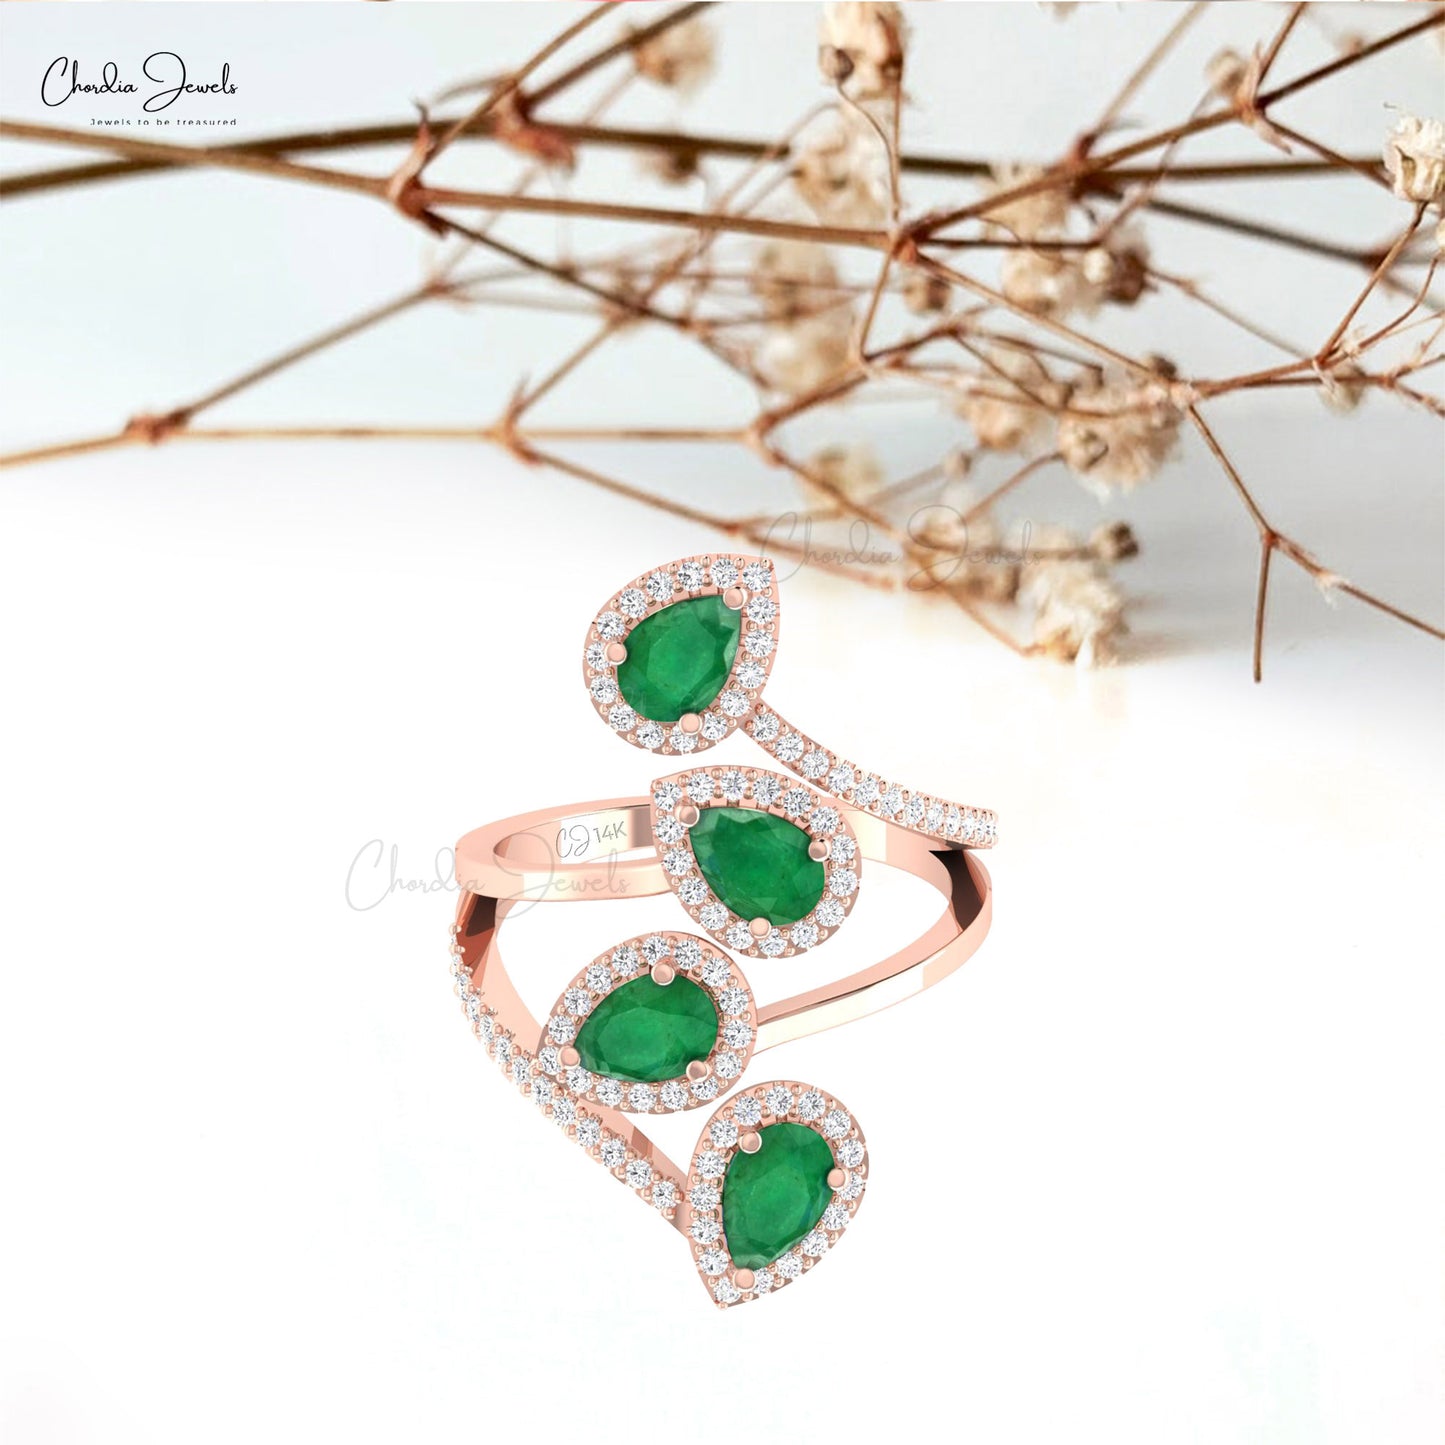 Dive into enchanting world of glamour with this emerald and diamond halo ring.